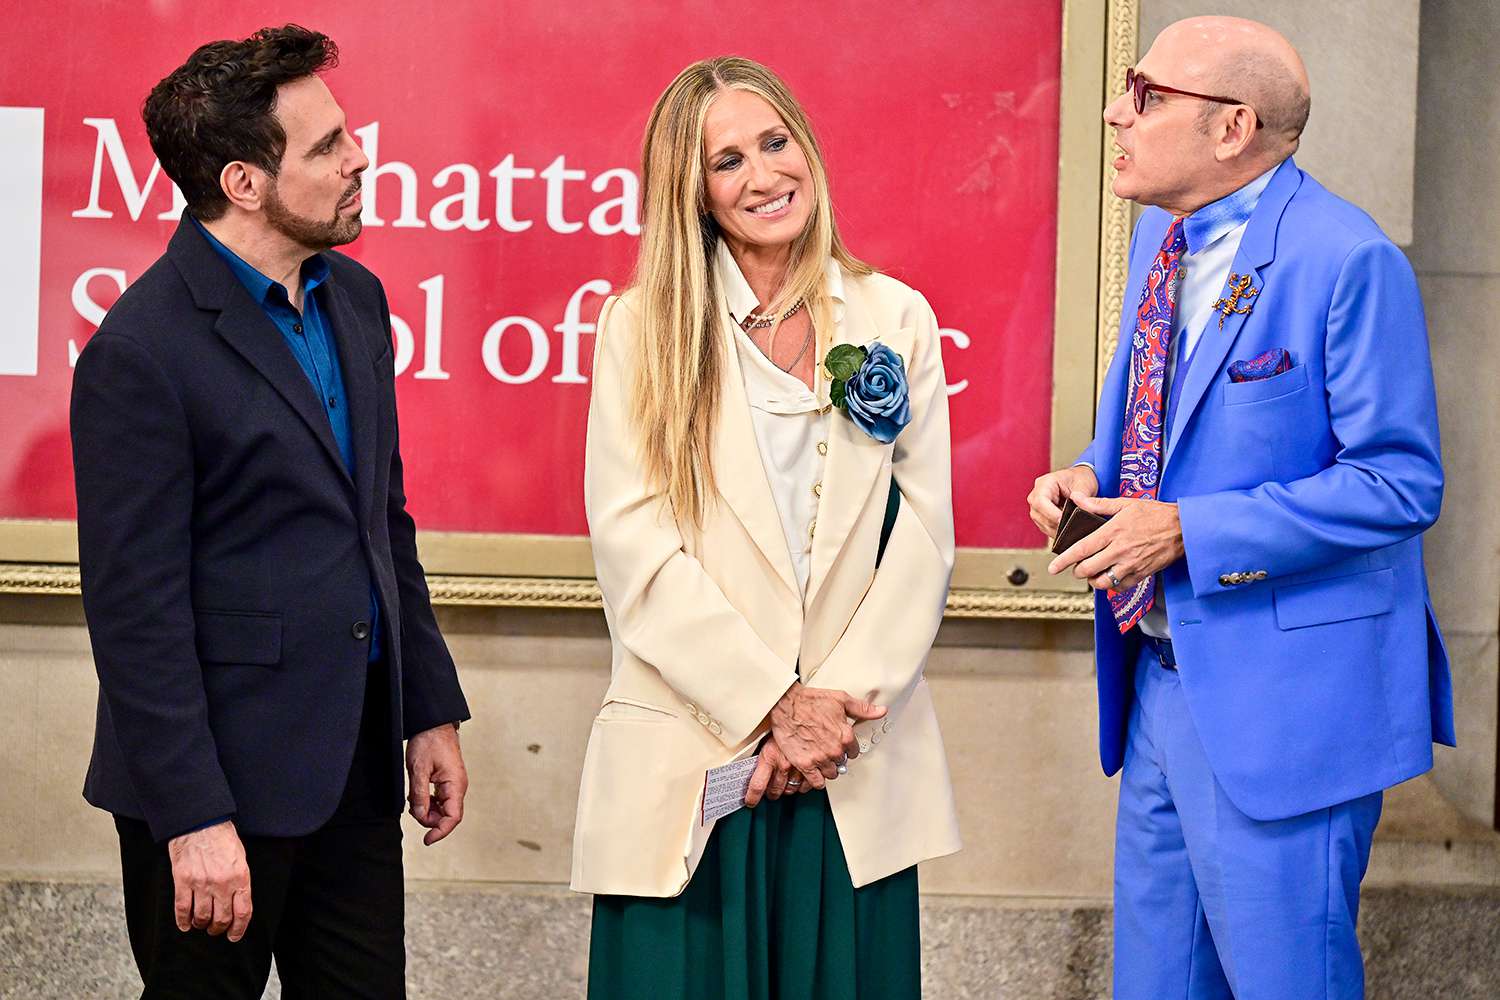 Mario Cantone, Sarah Jessica Parker and Willie Garson seen on the set of "And Just Like That..." the follow up series to "Sex and the City" at the Lyceum Theater on July 24, 2021 in New York City.